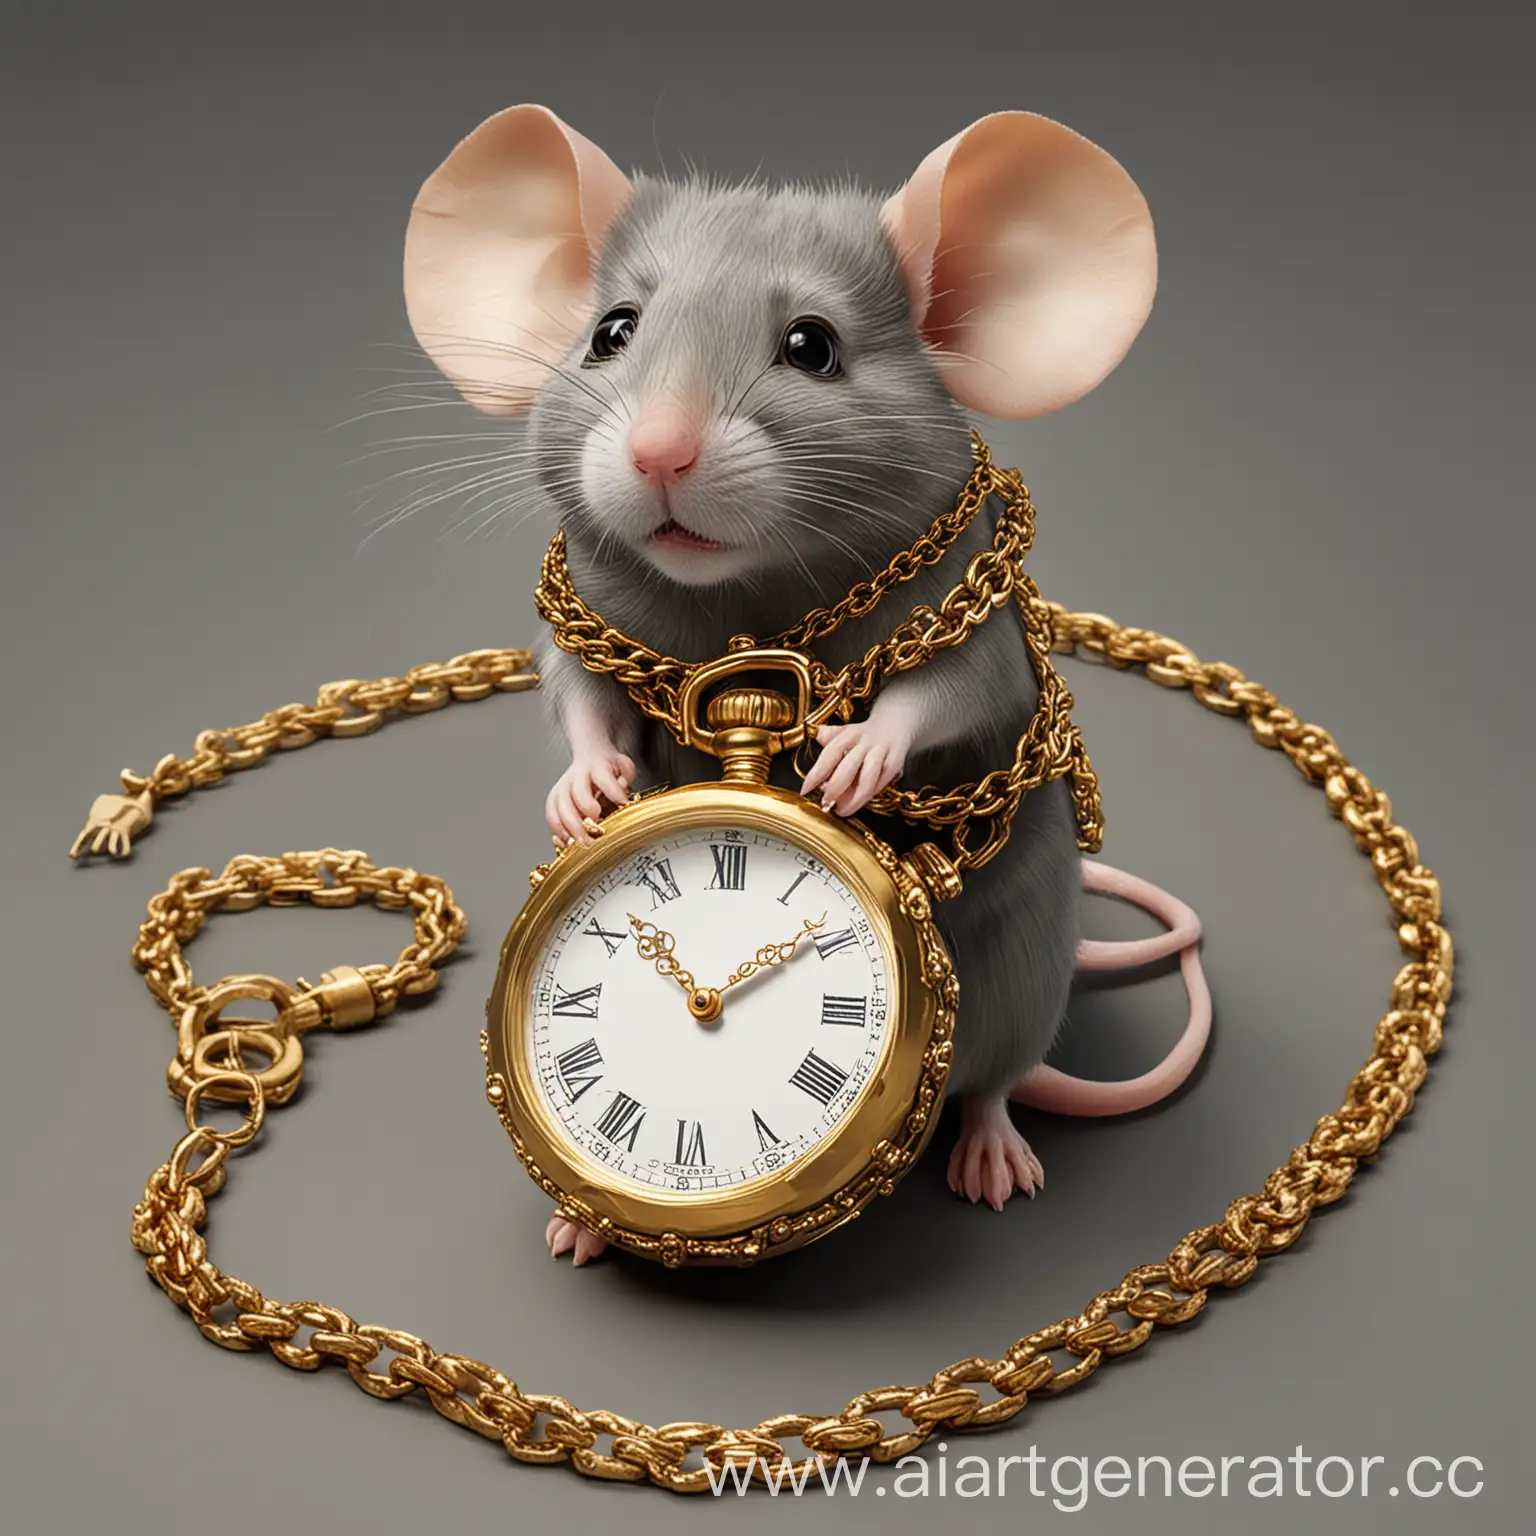 Luxurious-Mouse-Adorned-with-Golden-Chains-and-Watches